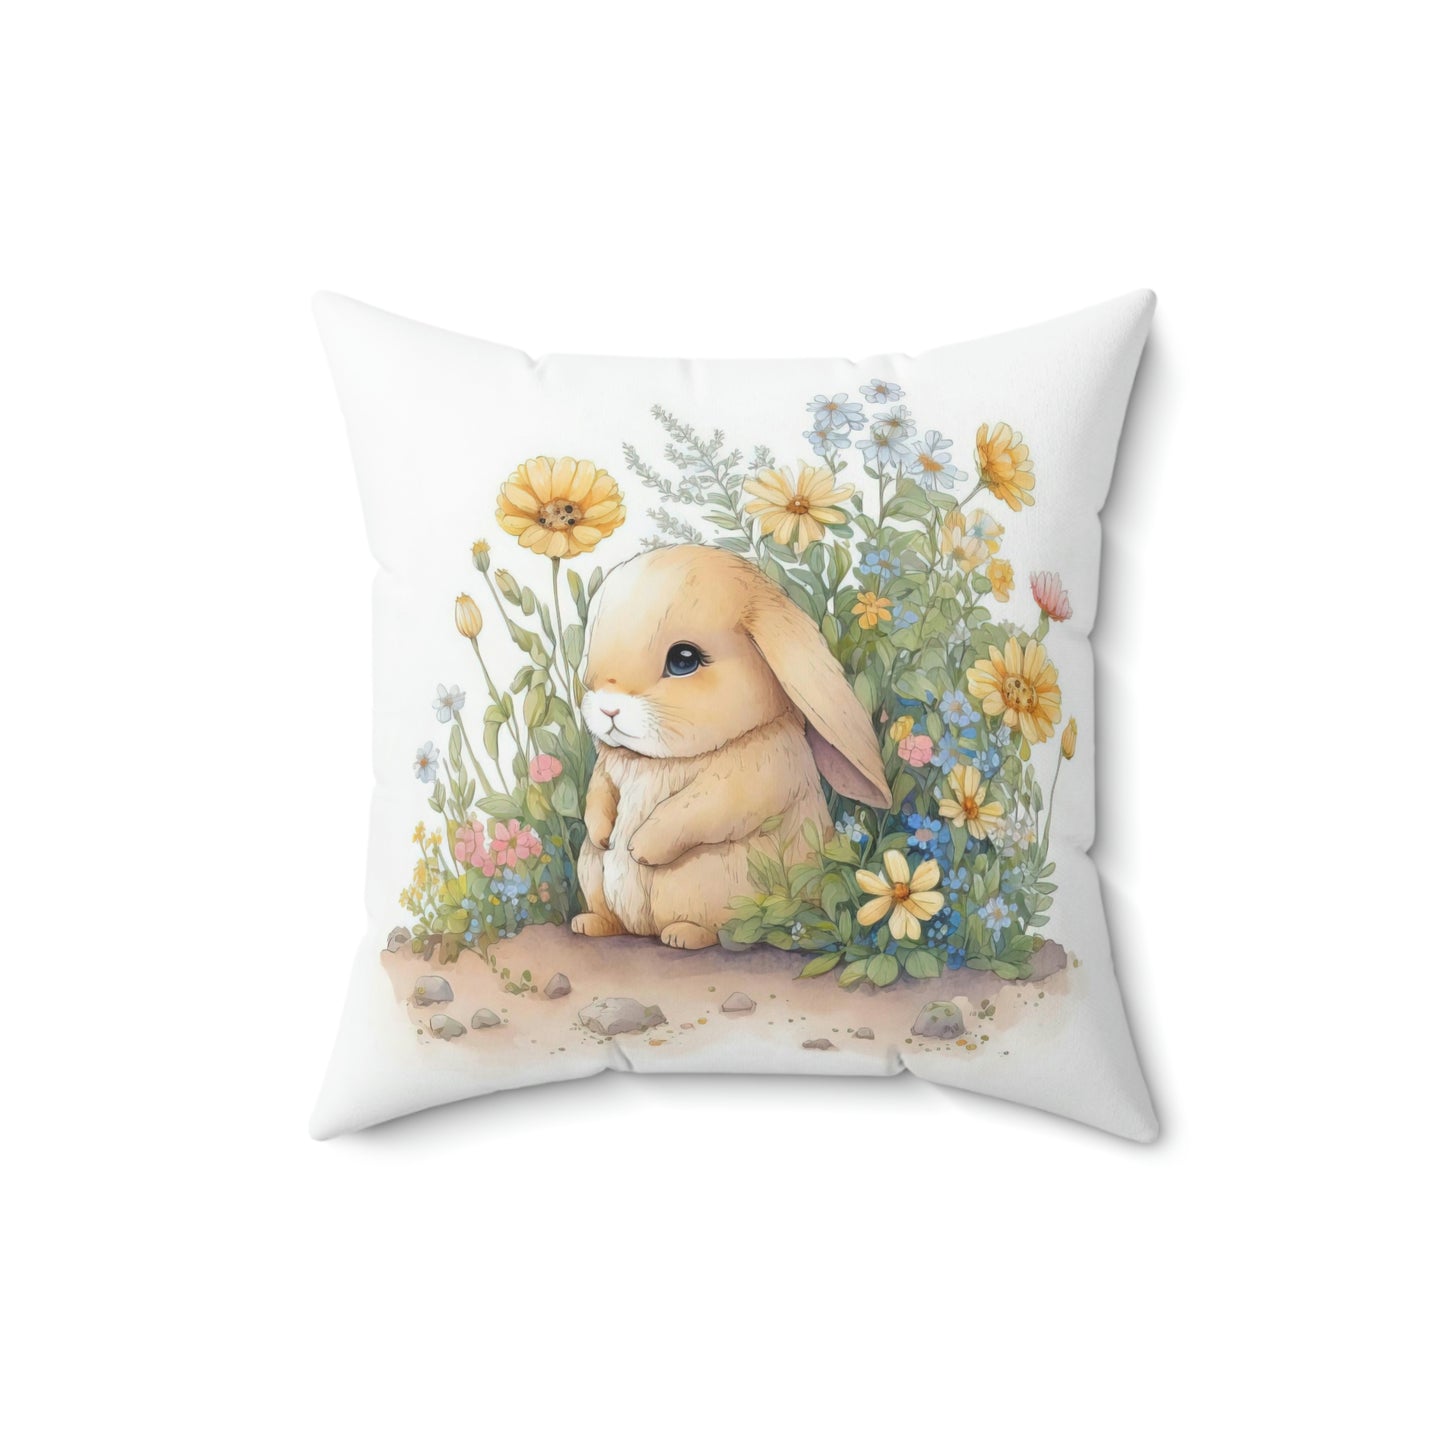 bunny accent throw pillow sitting on couch, square floral bunny pattern throw pillow on sofa or armchair, floral bunny spring room decoration